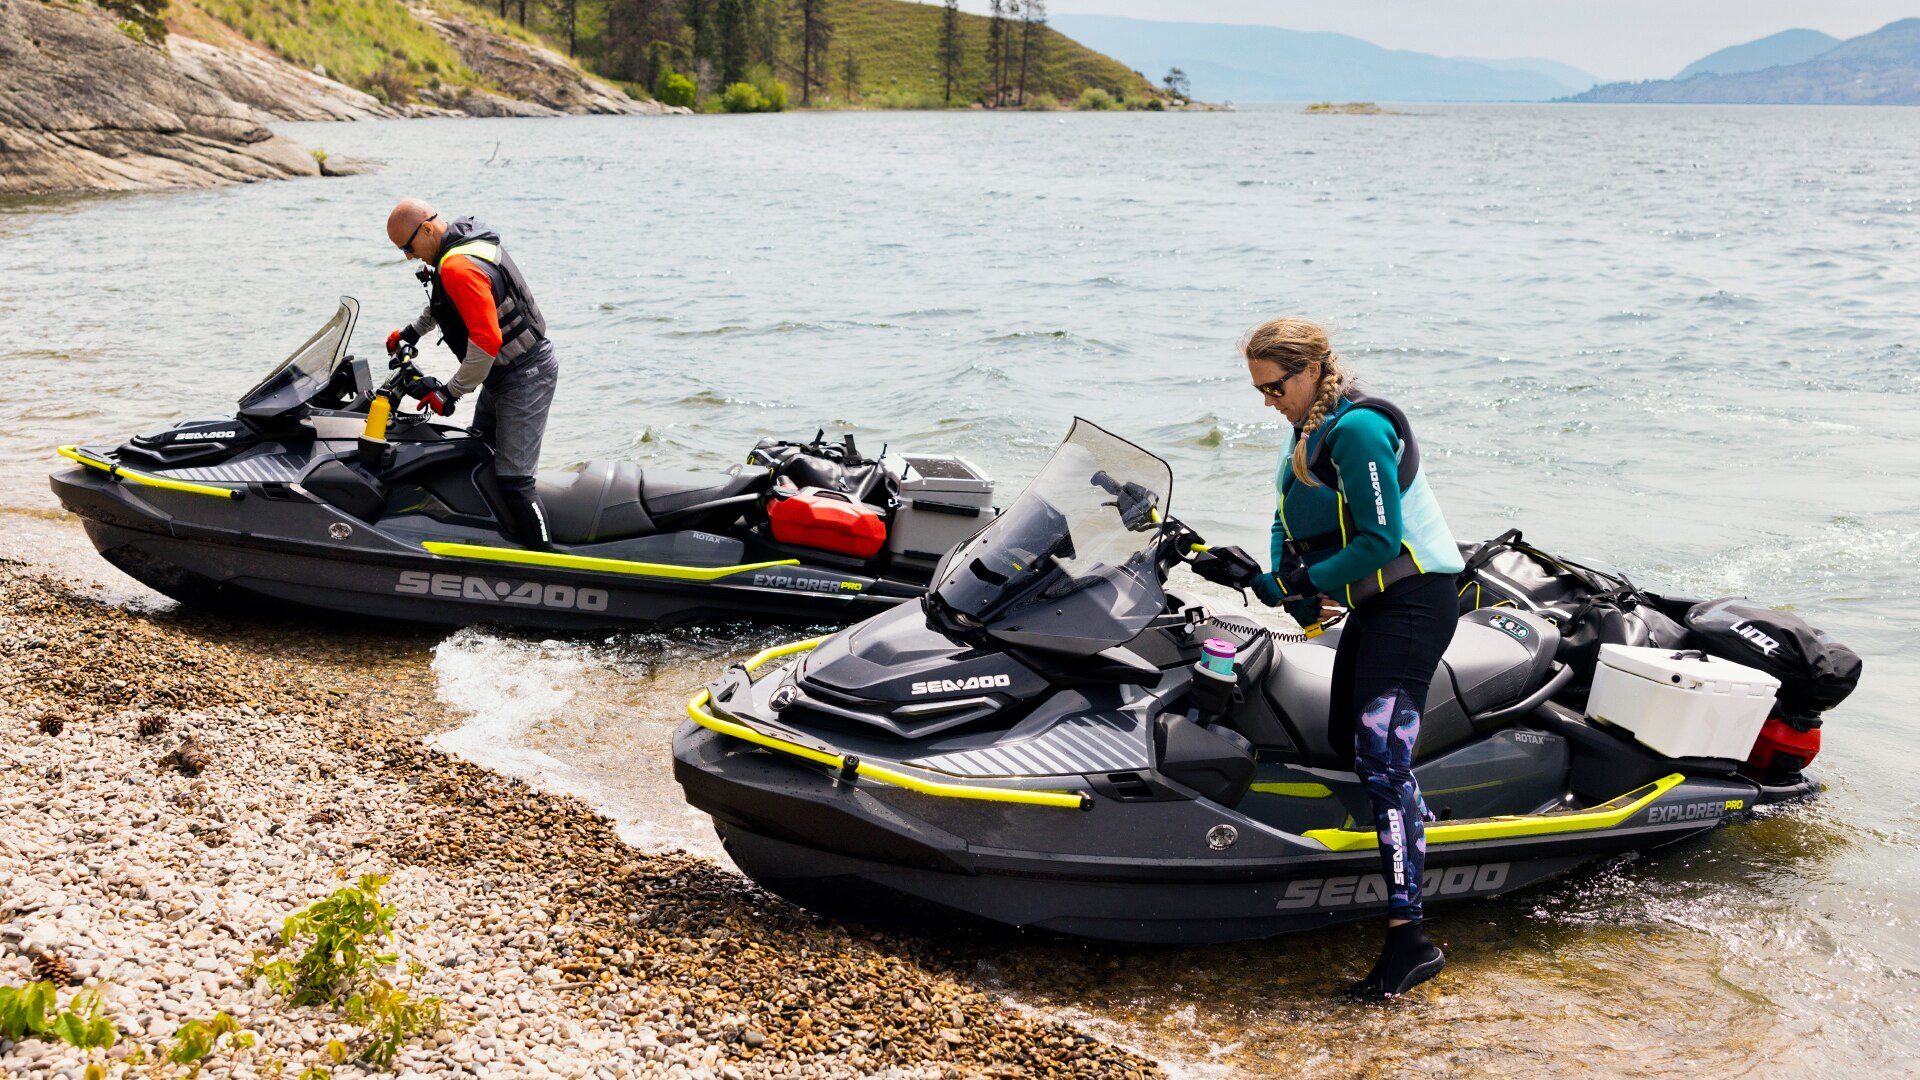 Two Sea-Doo Fish Pro personal watercrafts beached